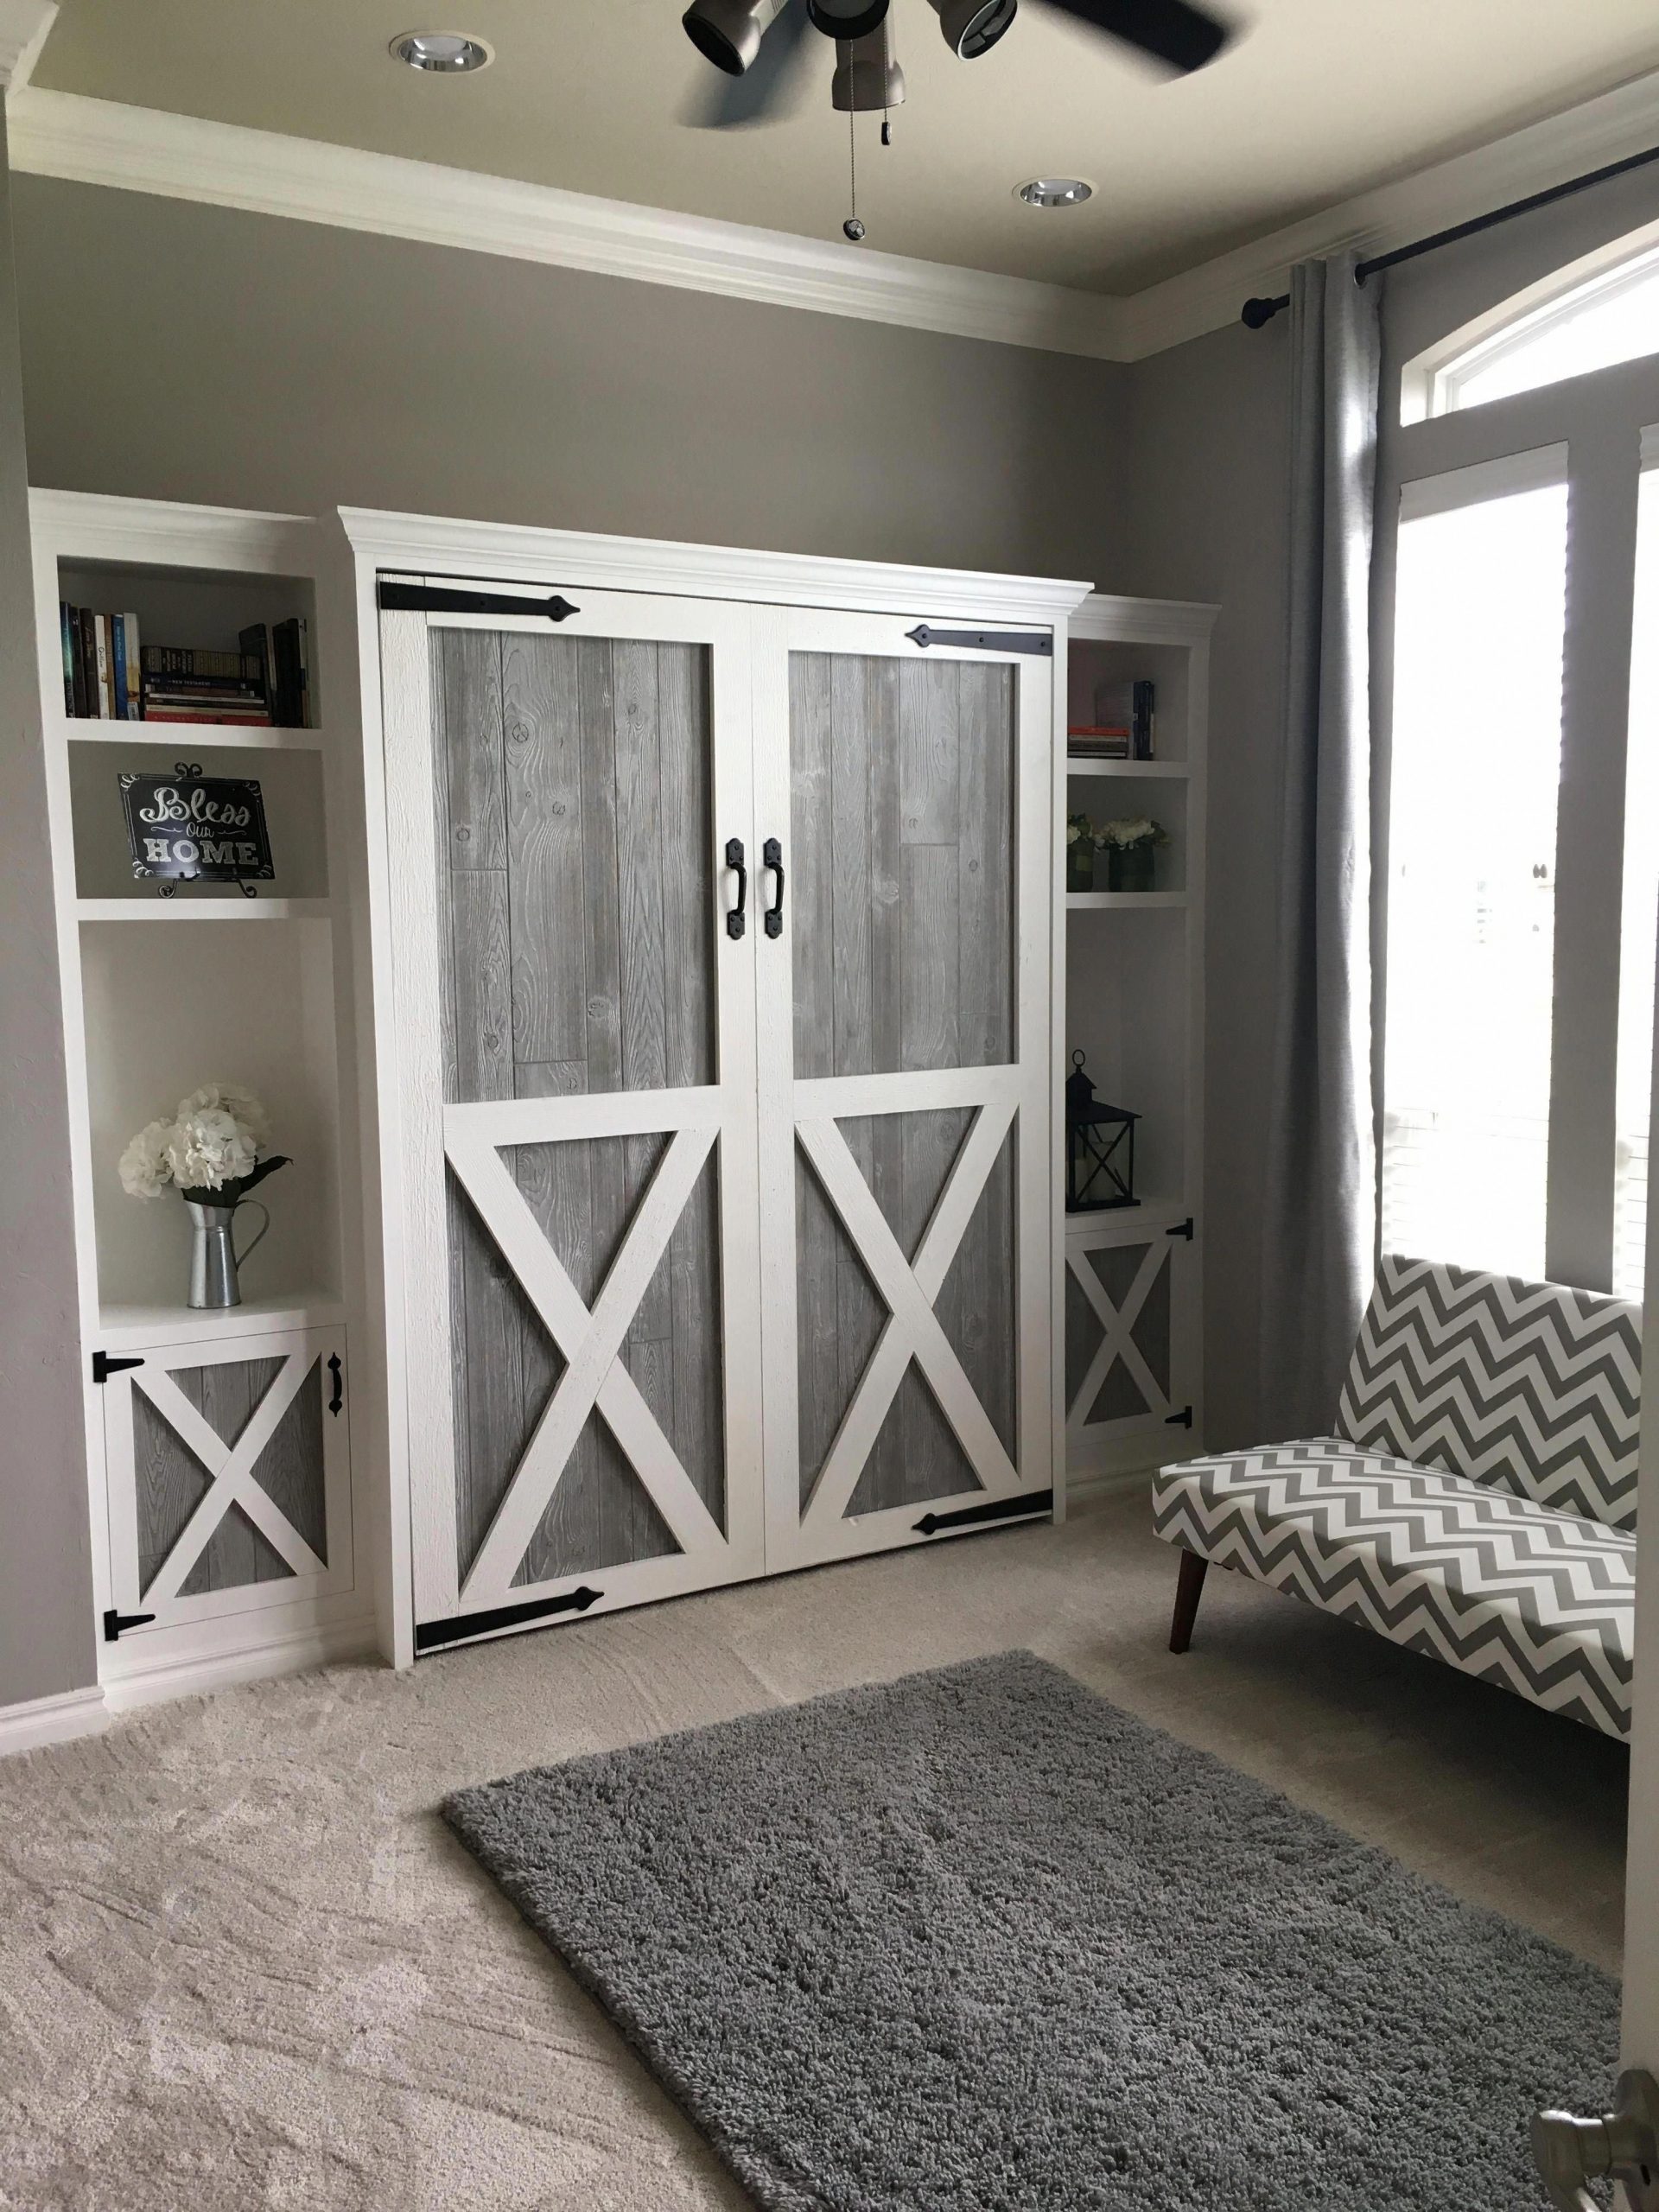 Explore our website for even more info on "murphy bed plans free". It is actuall...